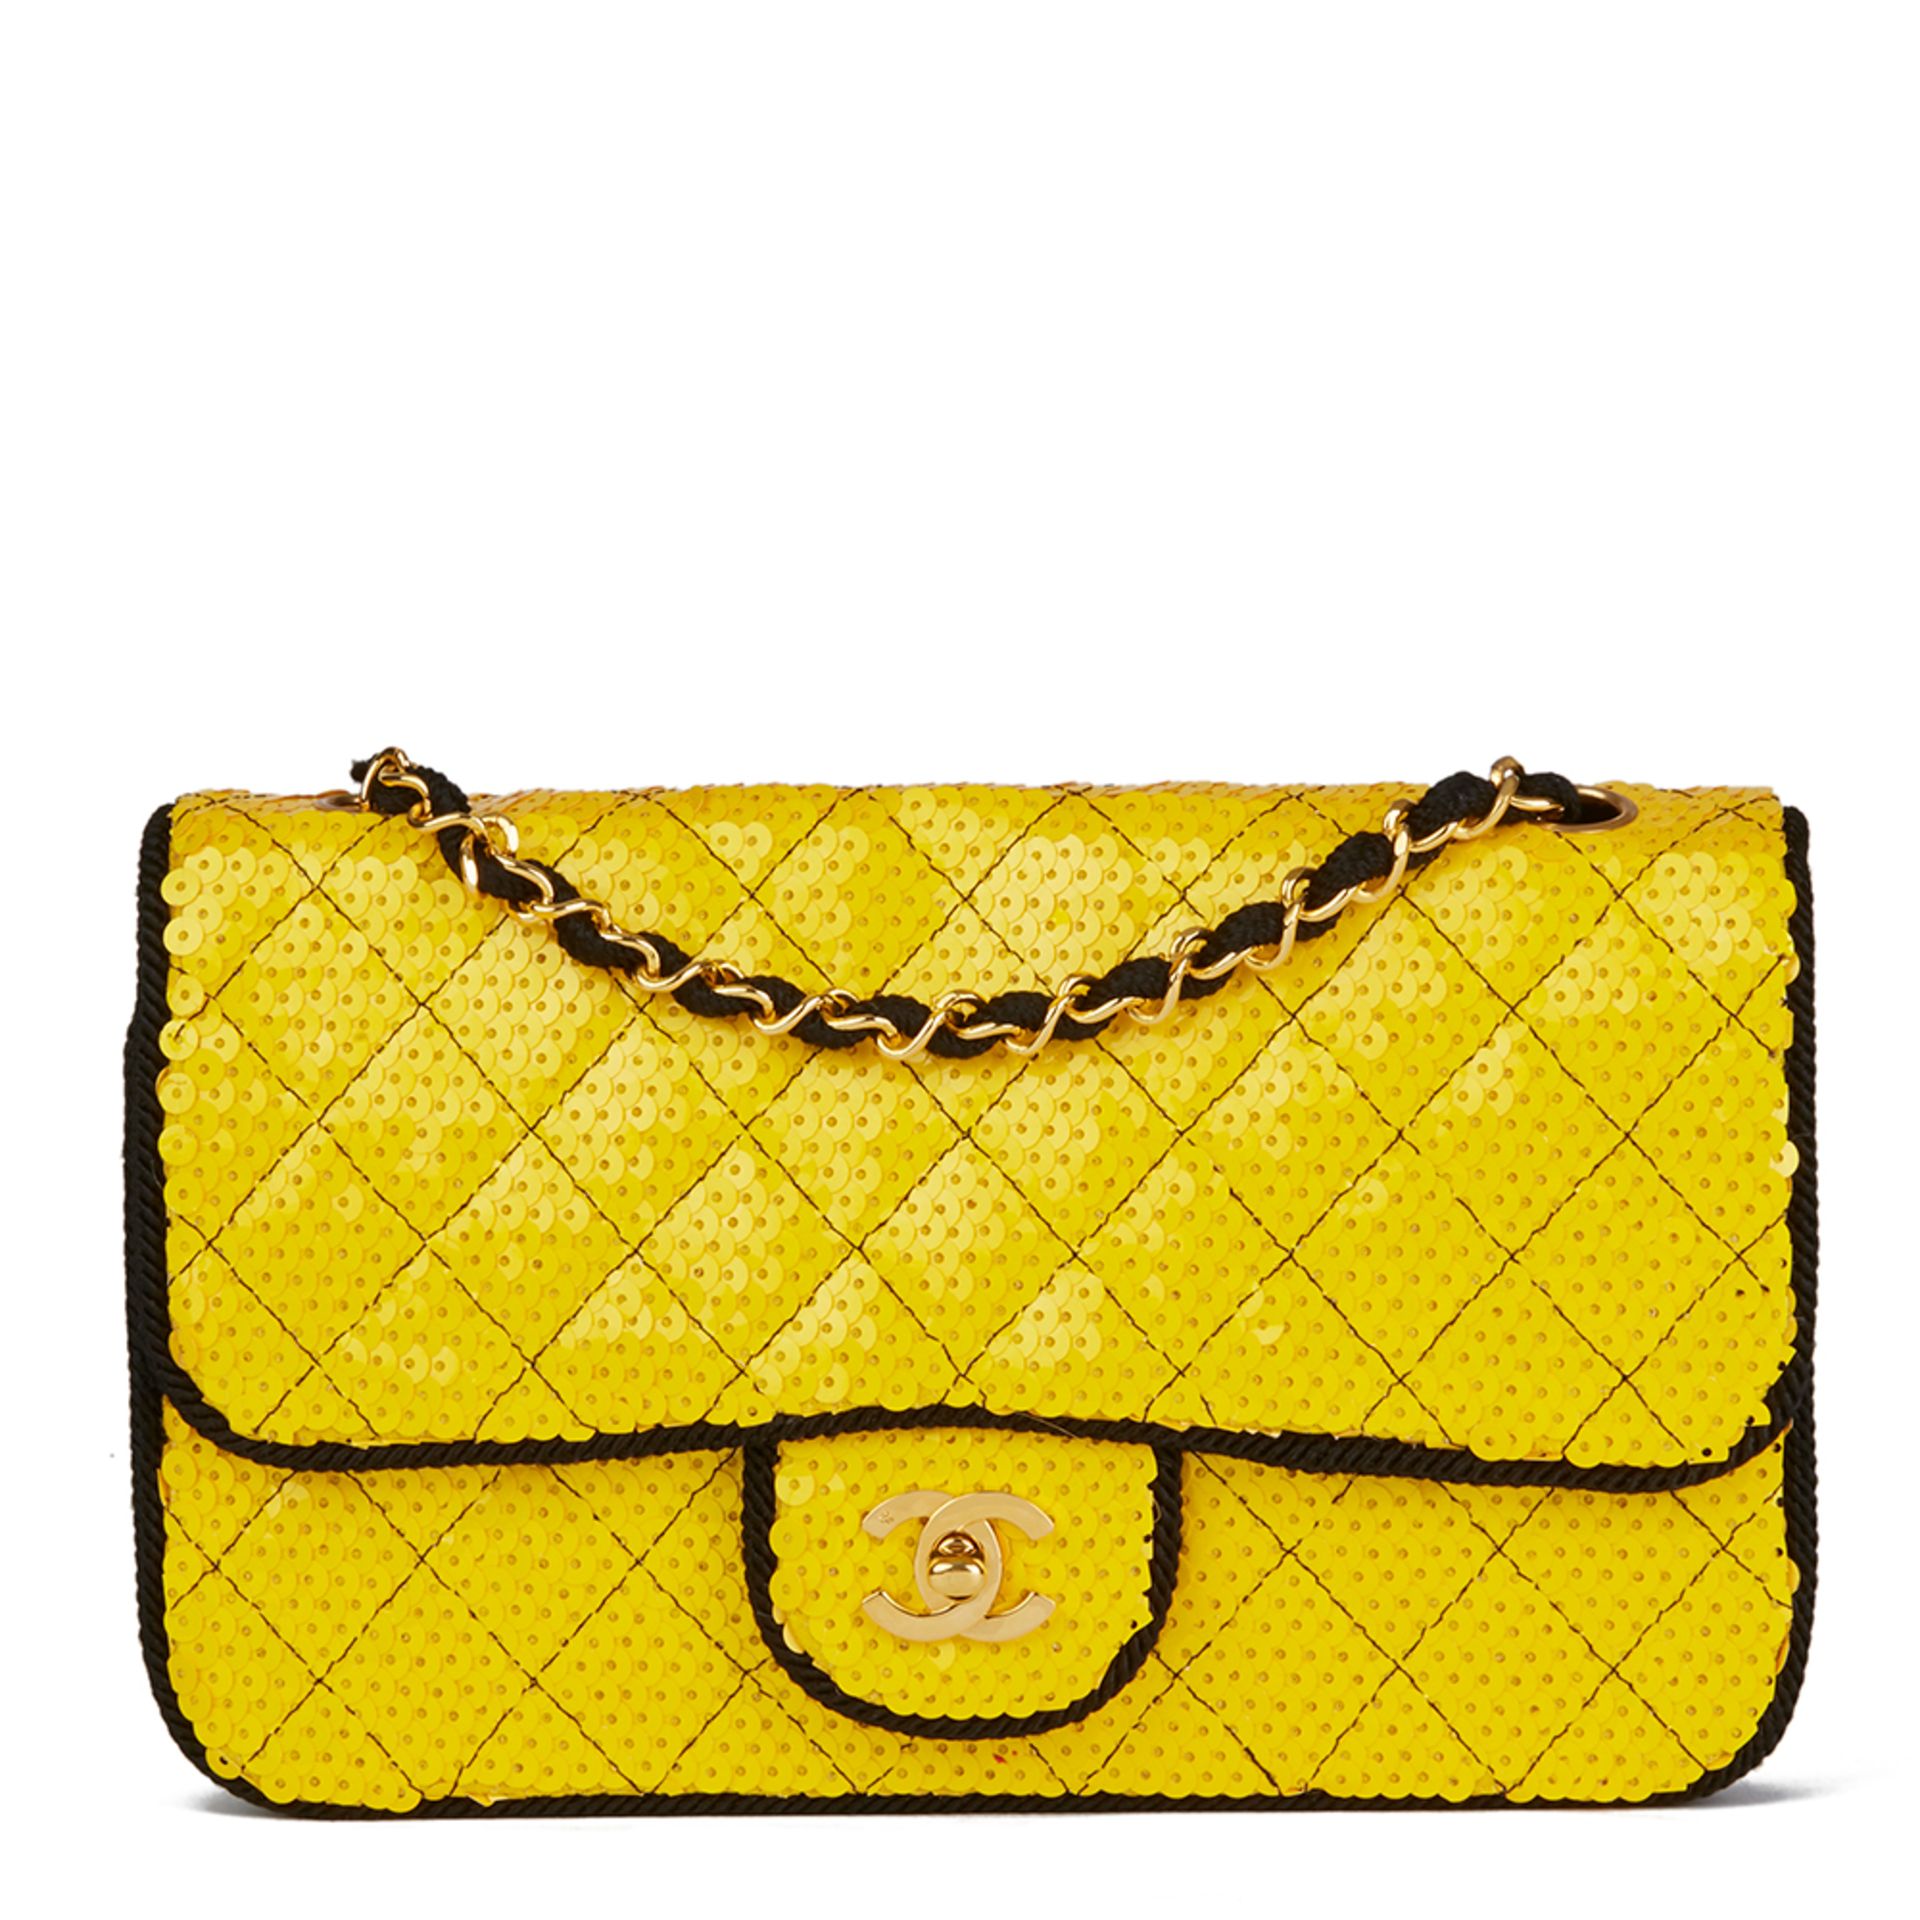 Chanel Yellow Quilted Sequin & Black Fabric Embellished Vintage Classic Single Flap Bag